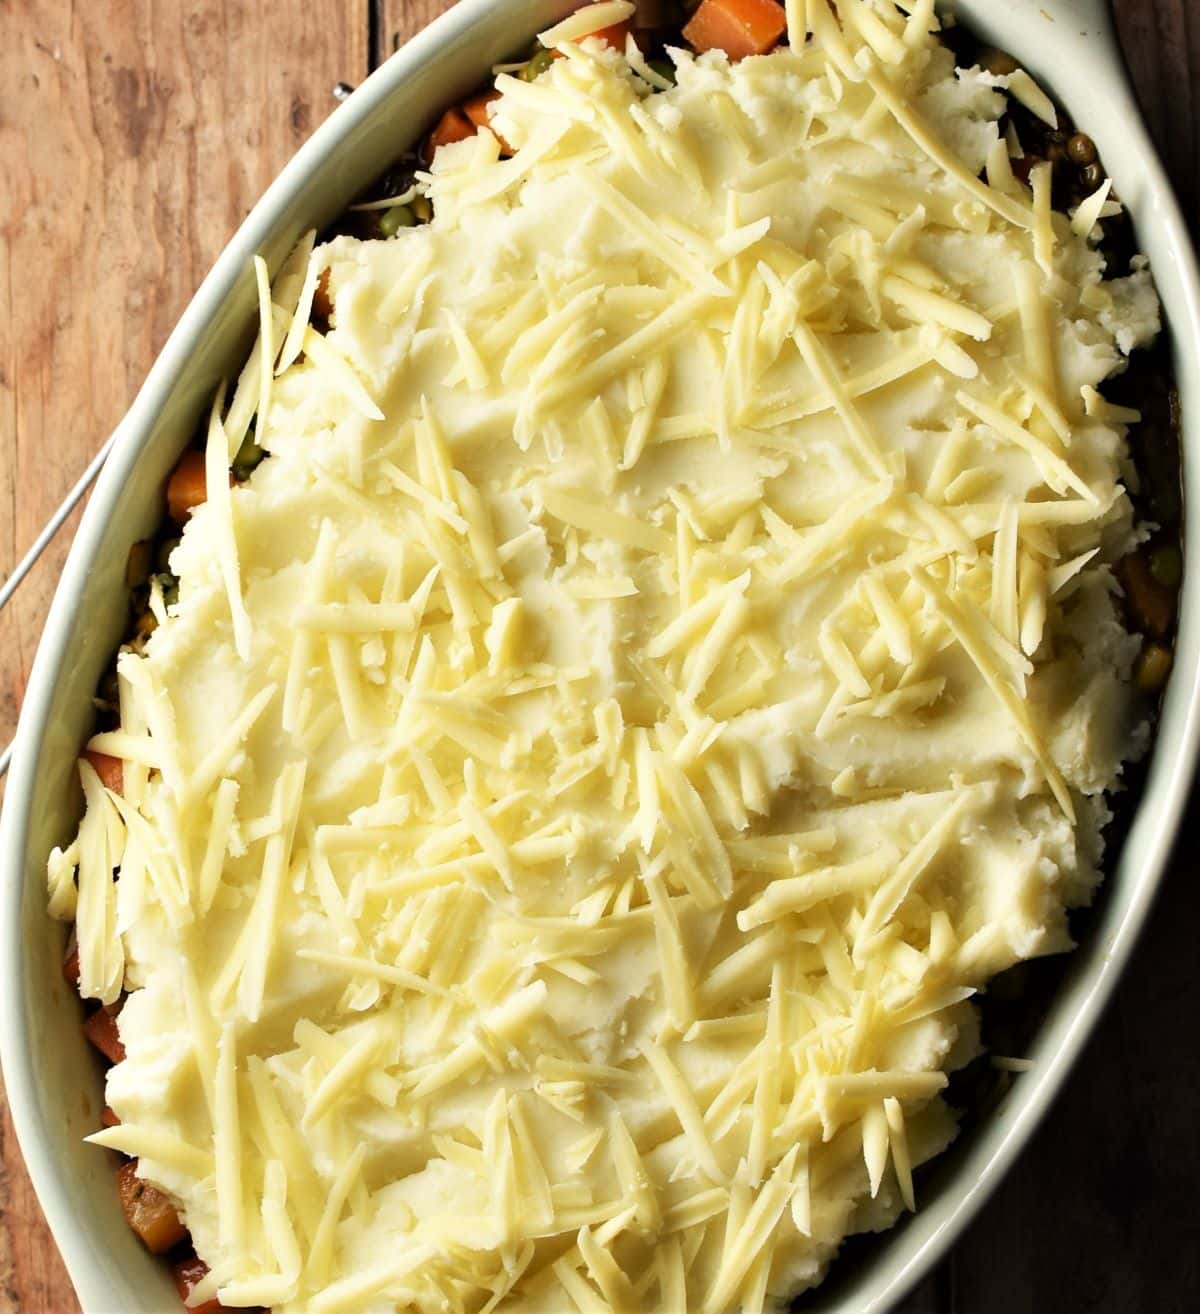 Shepherd's pie with potato topping and scatter of grated cheese.